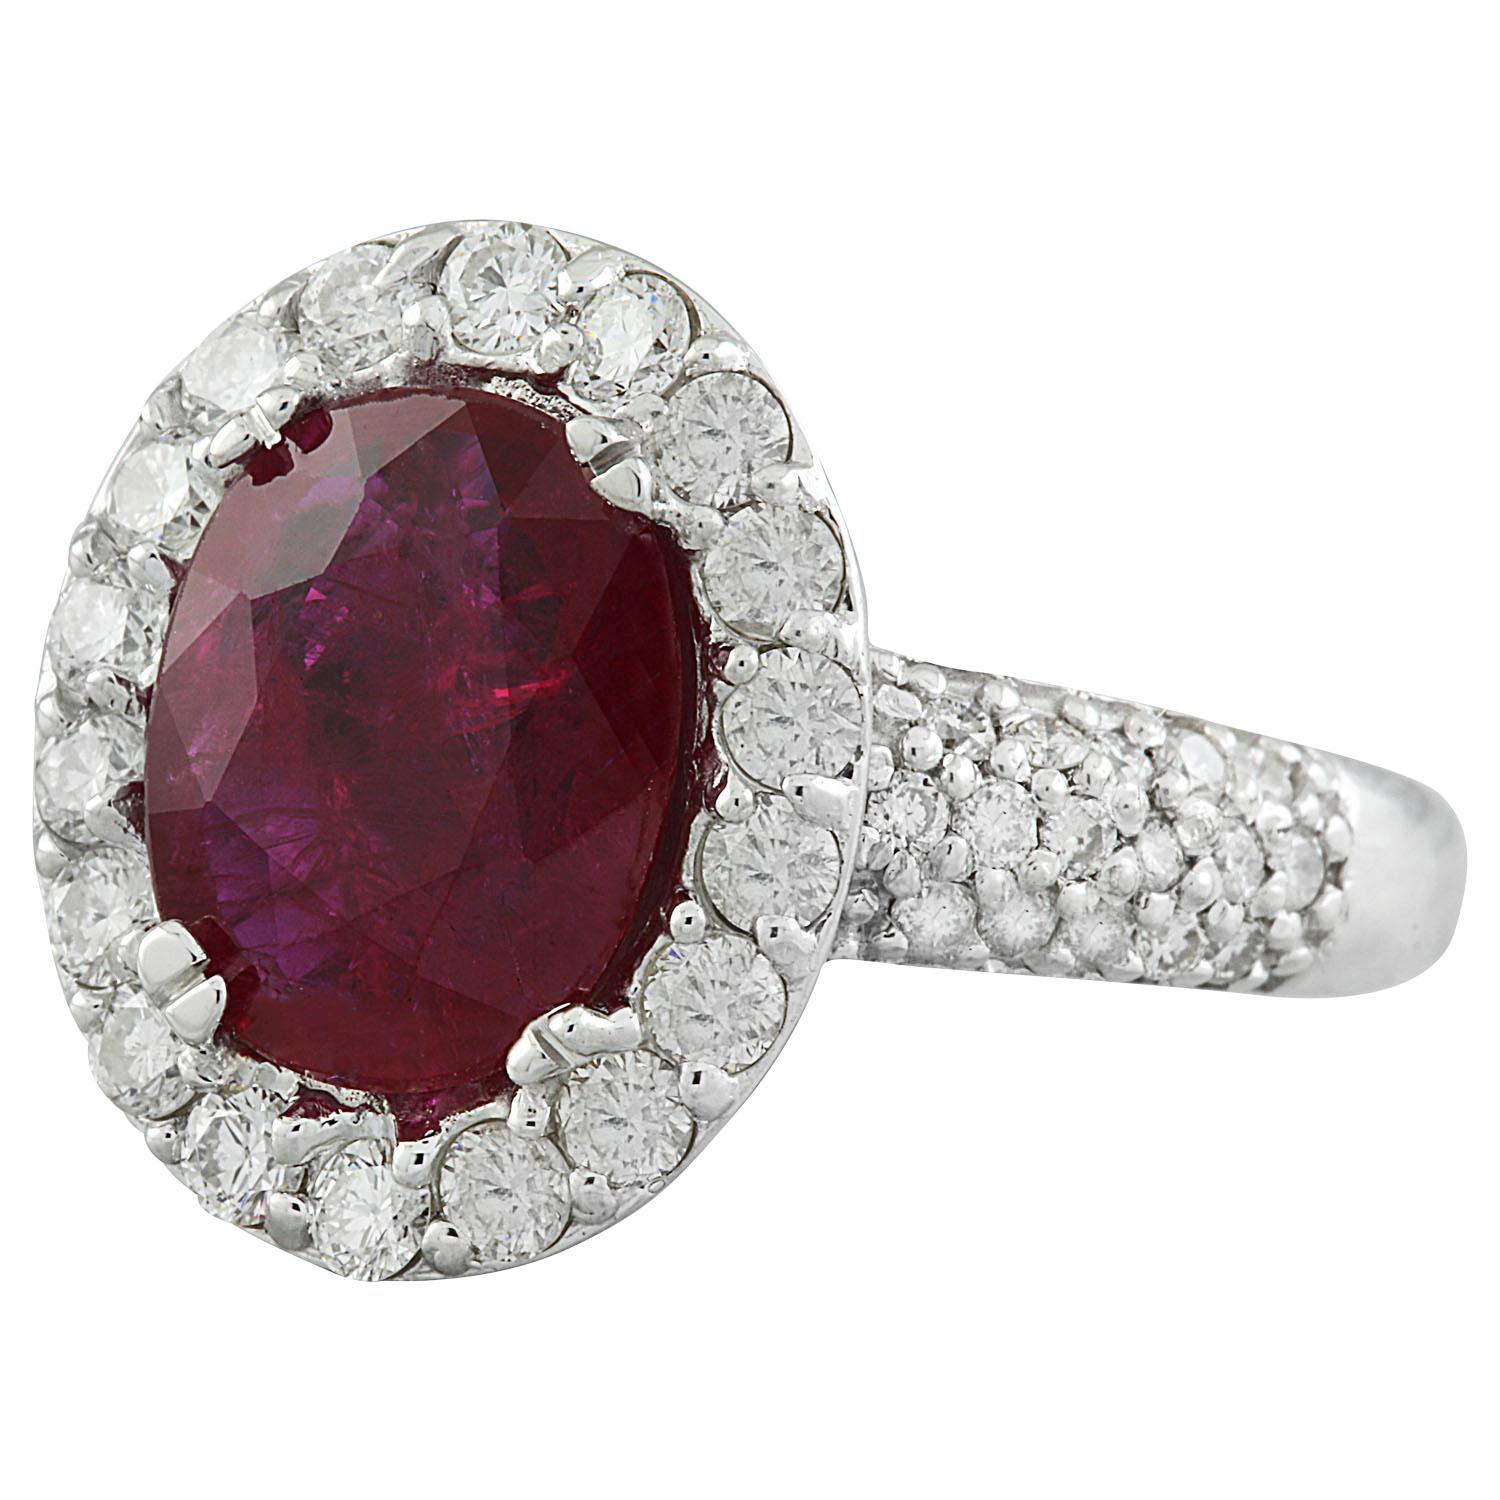 3.50 Carat Natural Ruby 14 Karat Solid White Gold Diamond Ring
Stamped: 14K
Total Ring Weight: 7 Grams 
Ruby Weight 2.60 Carat (10.00x8.00 Millimeters)
Diamond Weight: 0.90 carat (F-G Color, VS2-SI1 Clarity)
Quantity: 62
Face Measures: 15.70x13.40